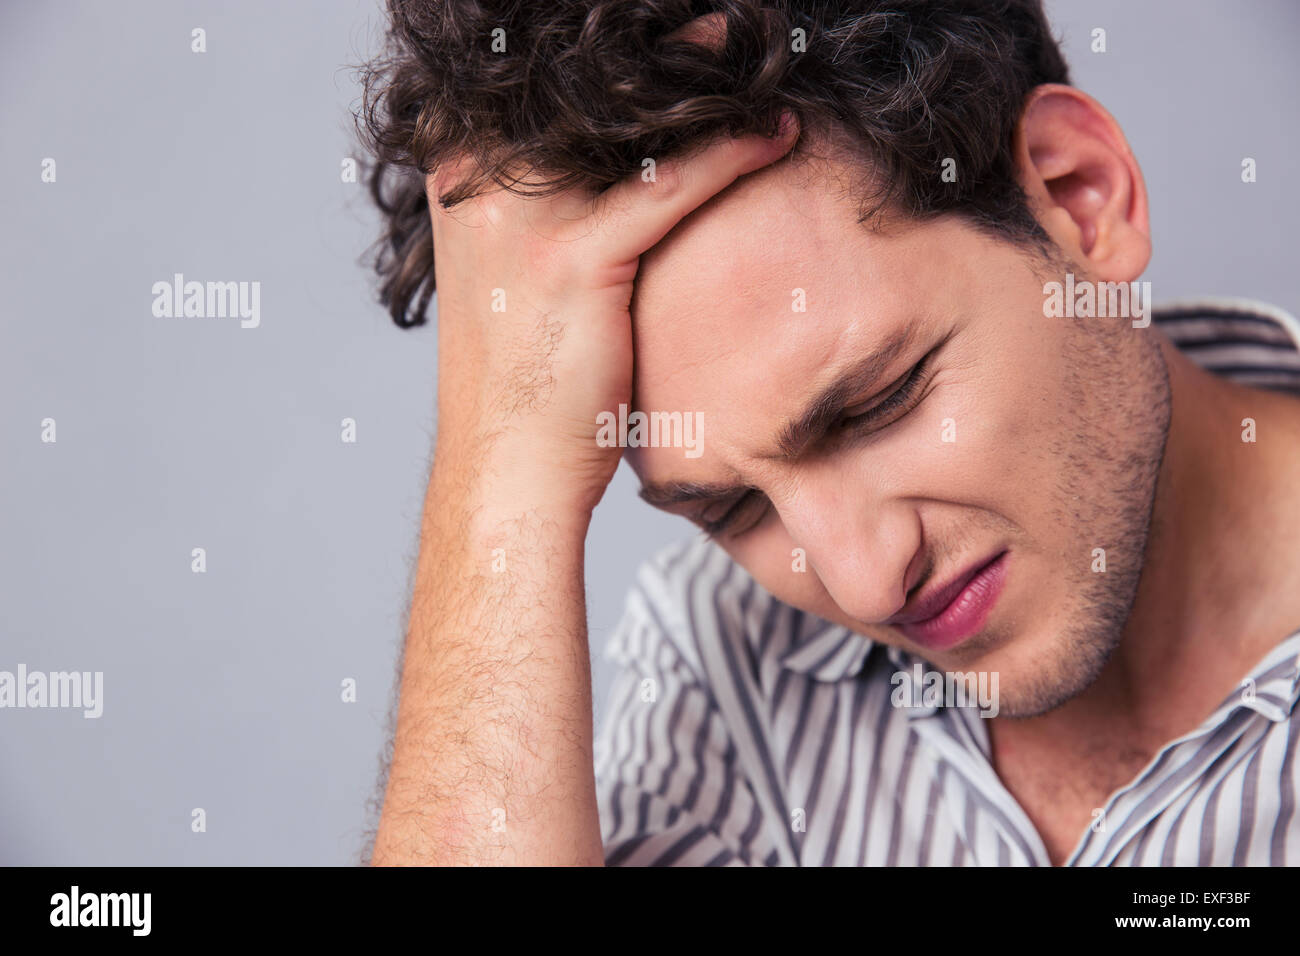 Closeup portrait of a stressed casual man over gray background Stock Photo